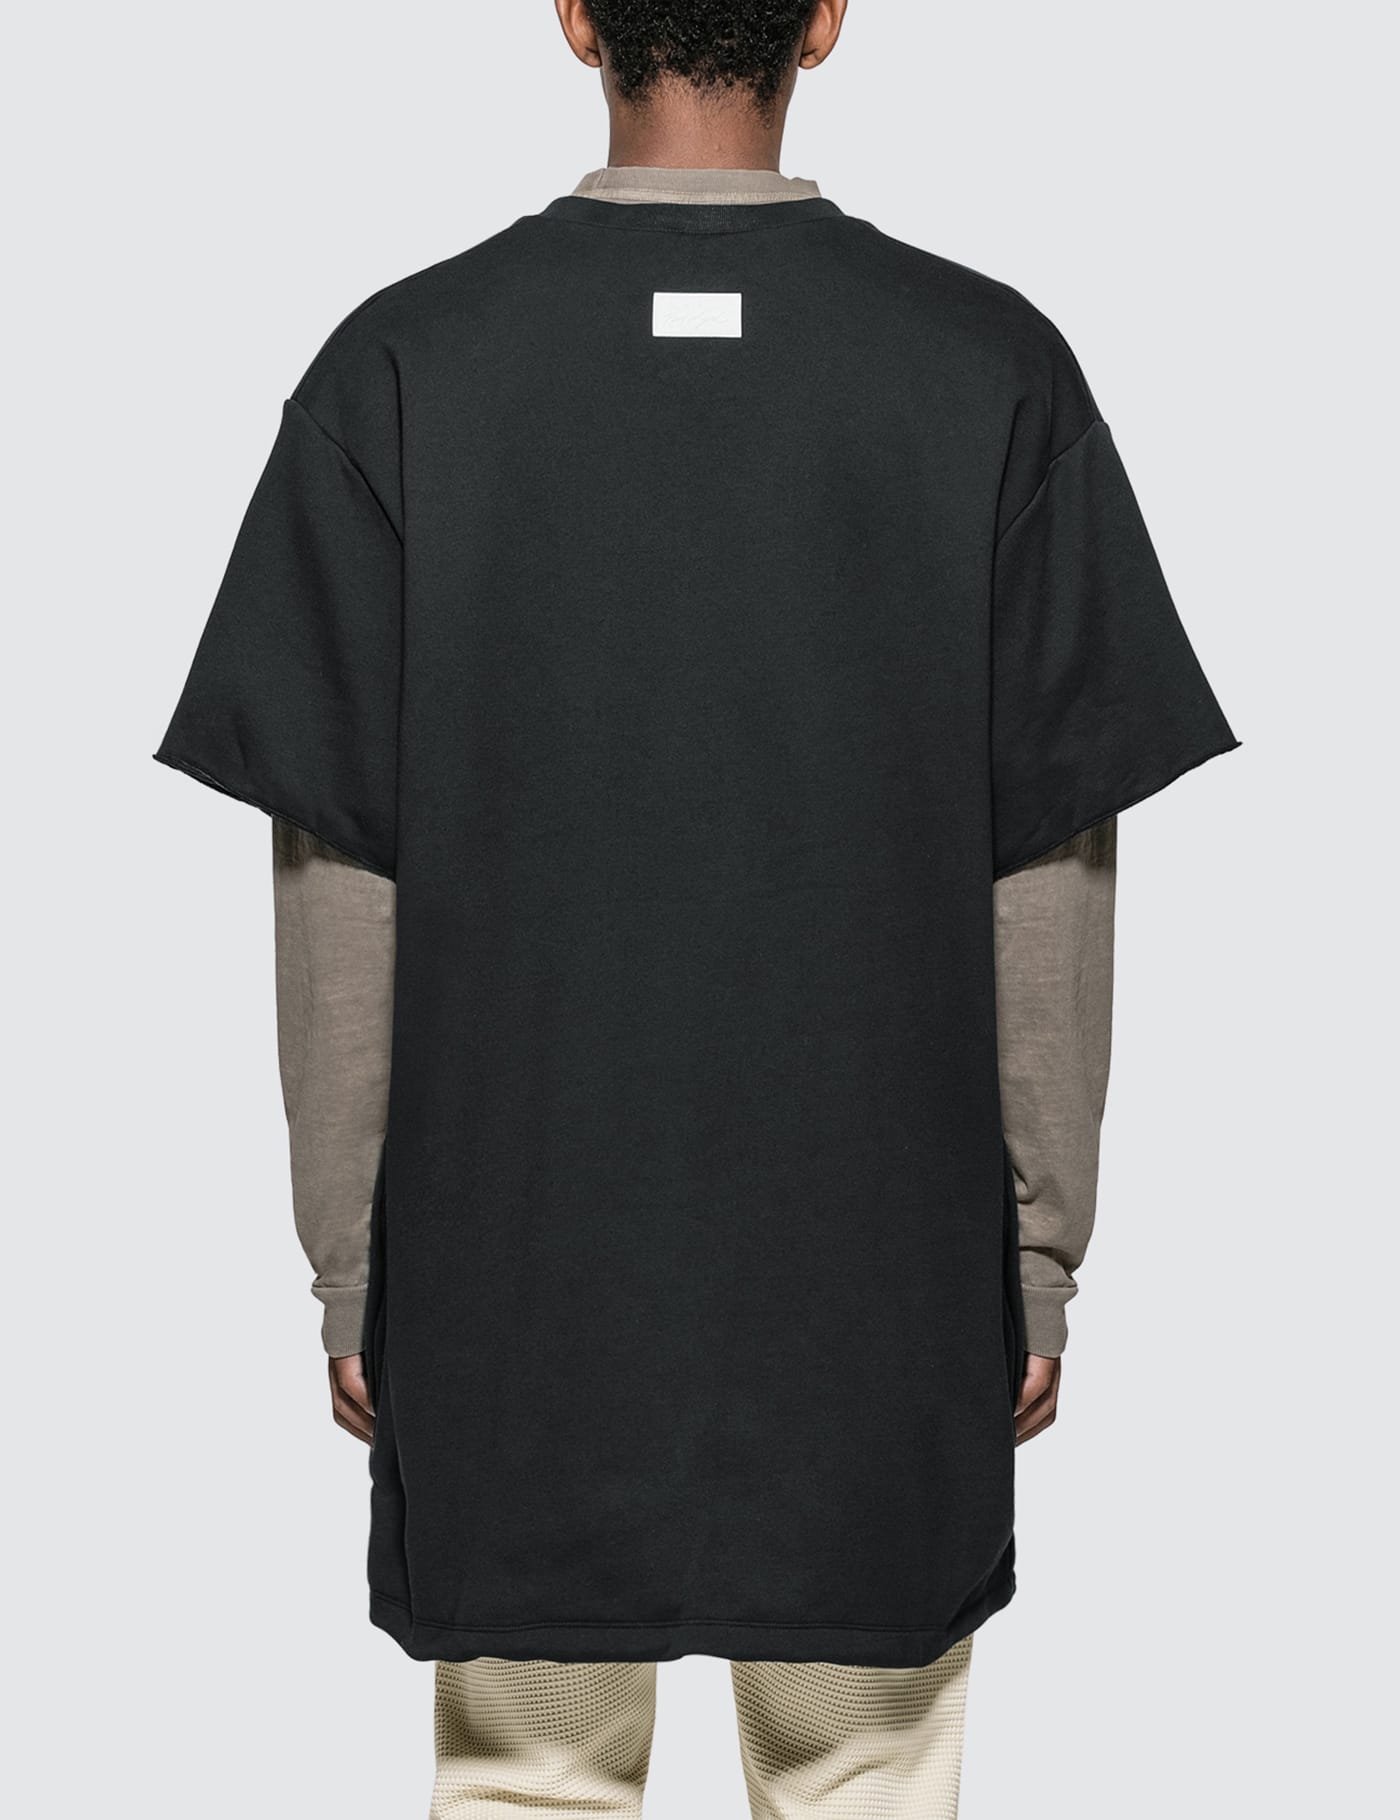 Nike - Fear Of God x Nike Warm Up Top | HBX - Globally Curated 